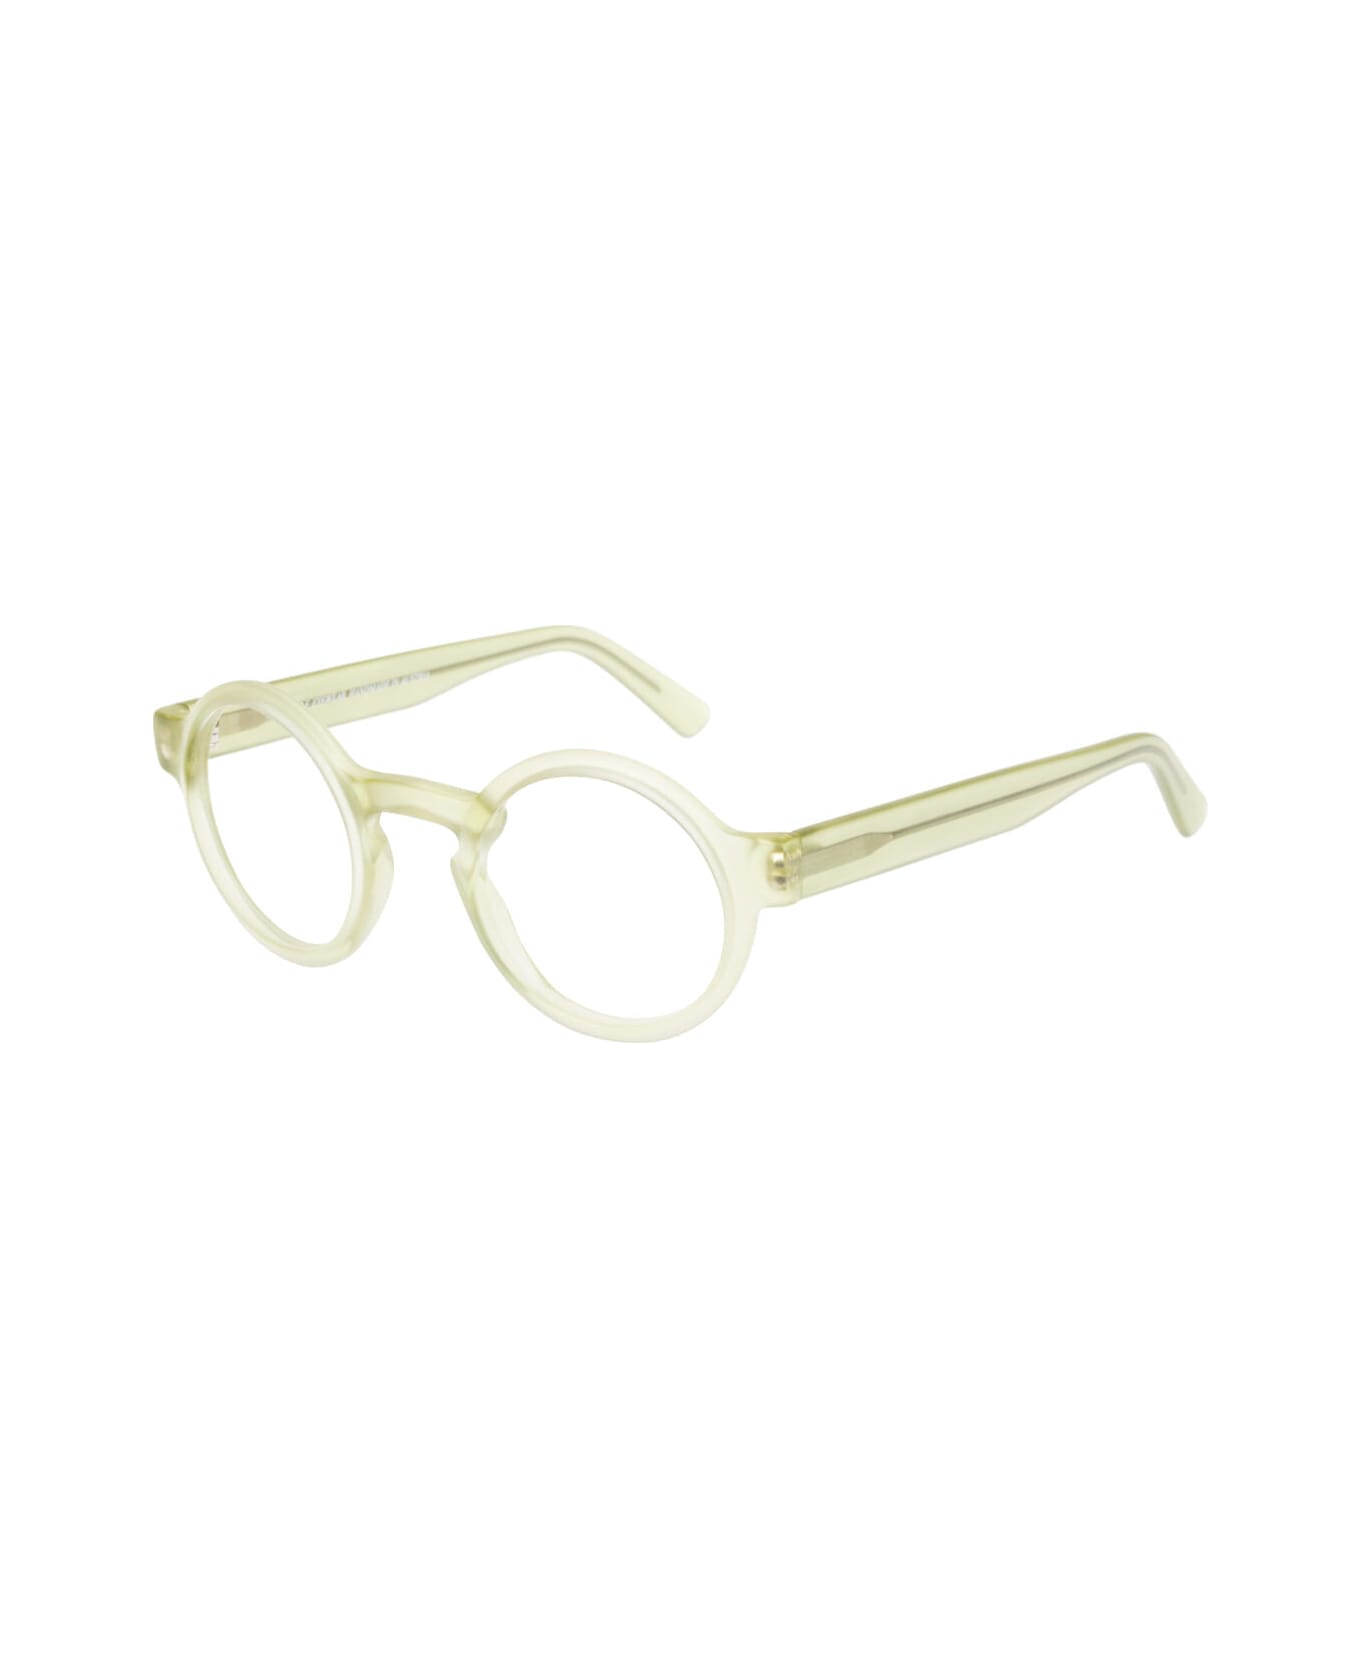 Andy Wolf 4522 F Glasses - green